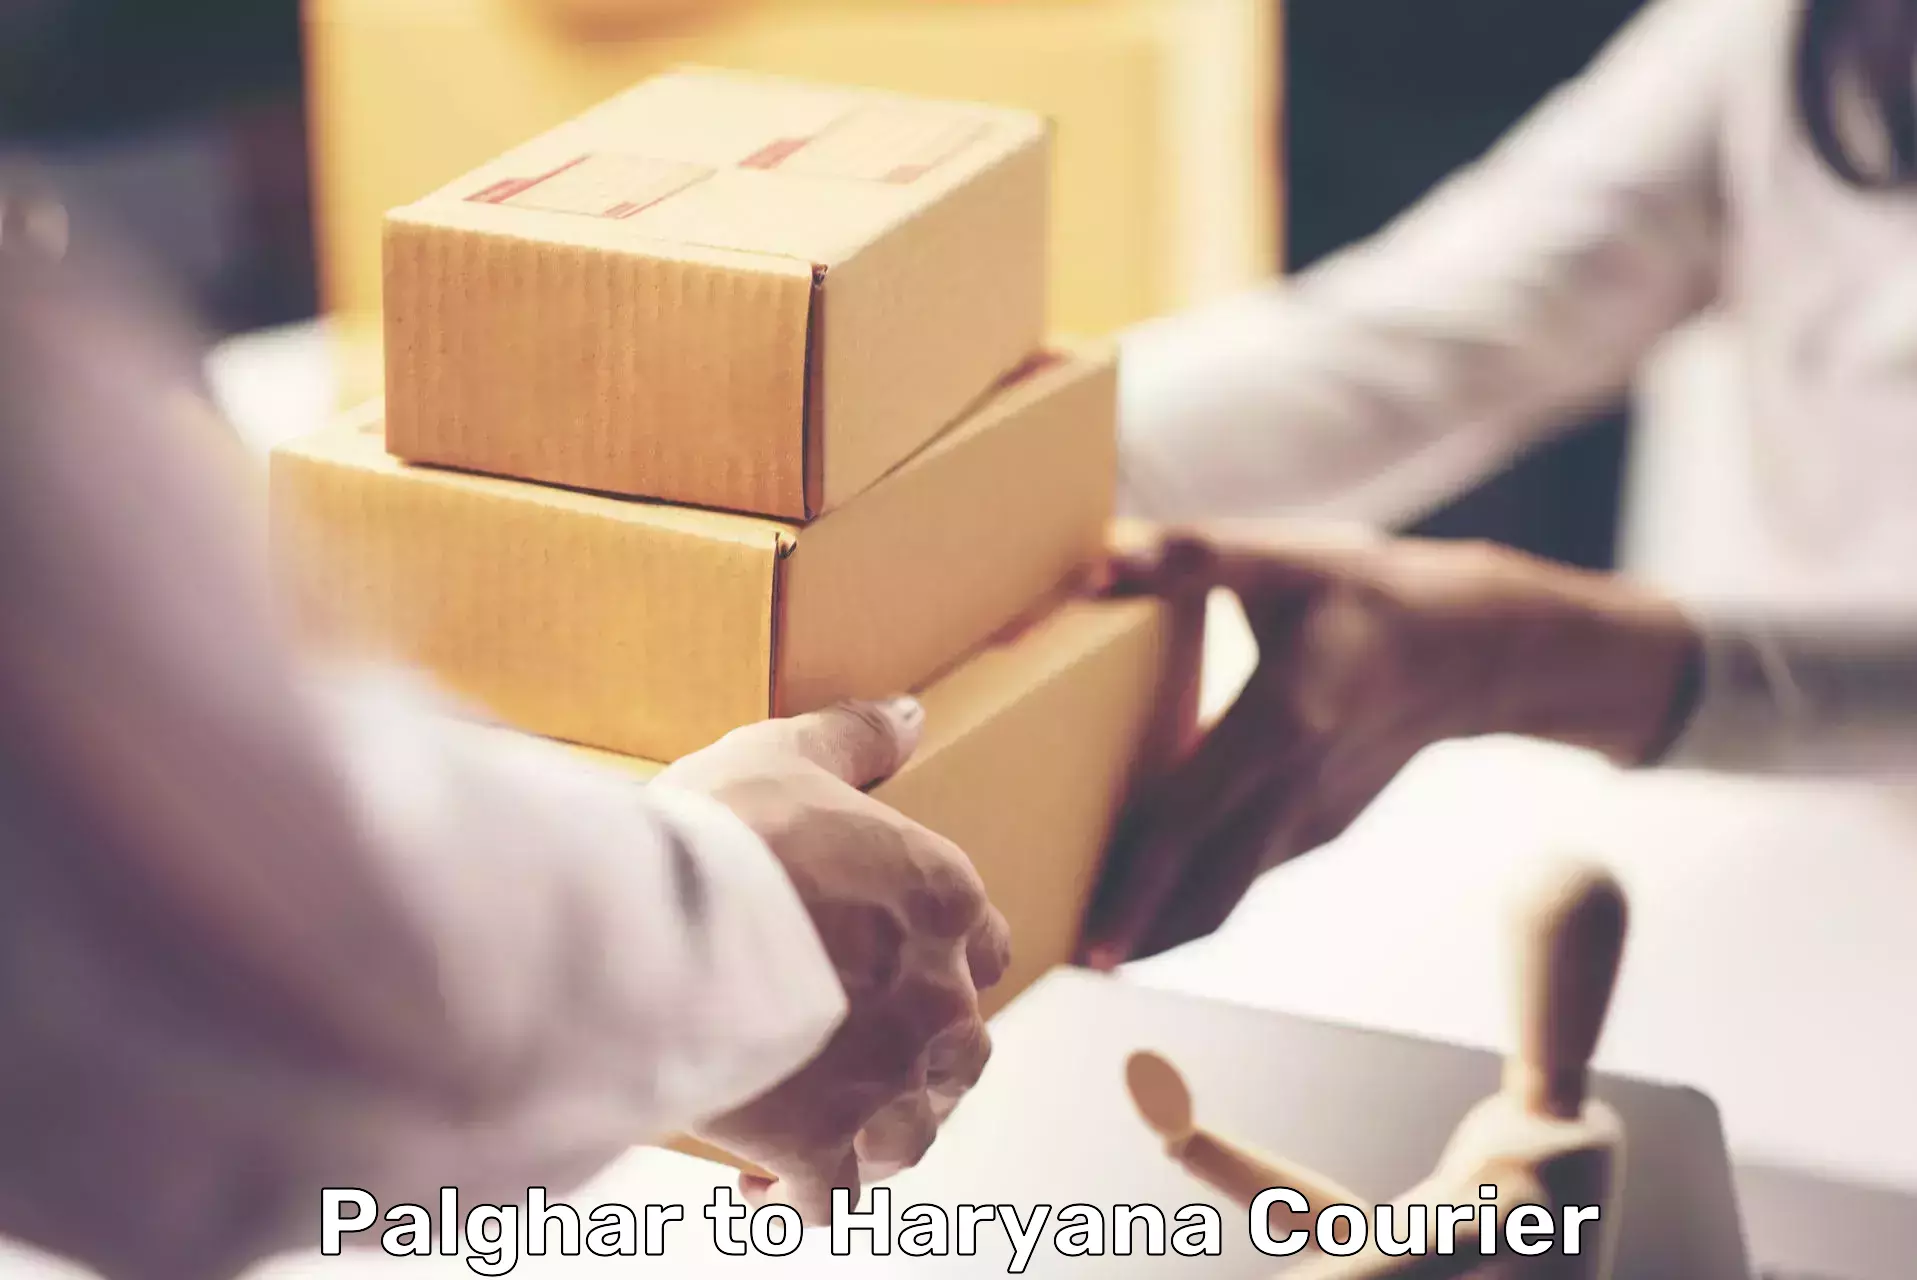 Premium courier solutions Palghar to NCR Haryana